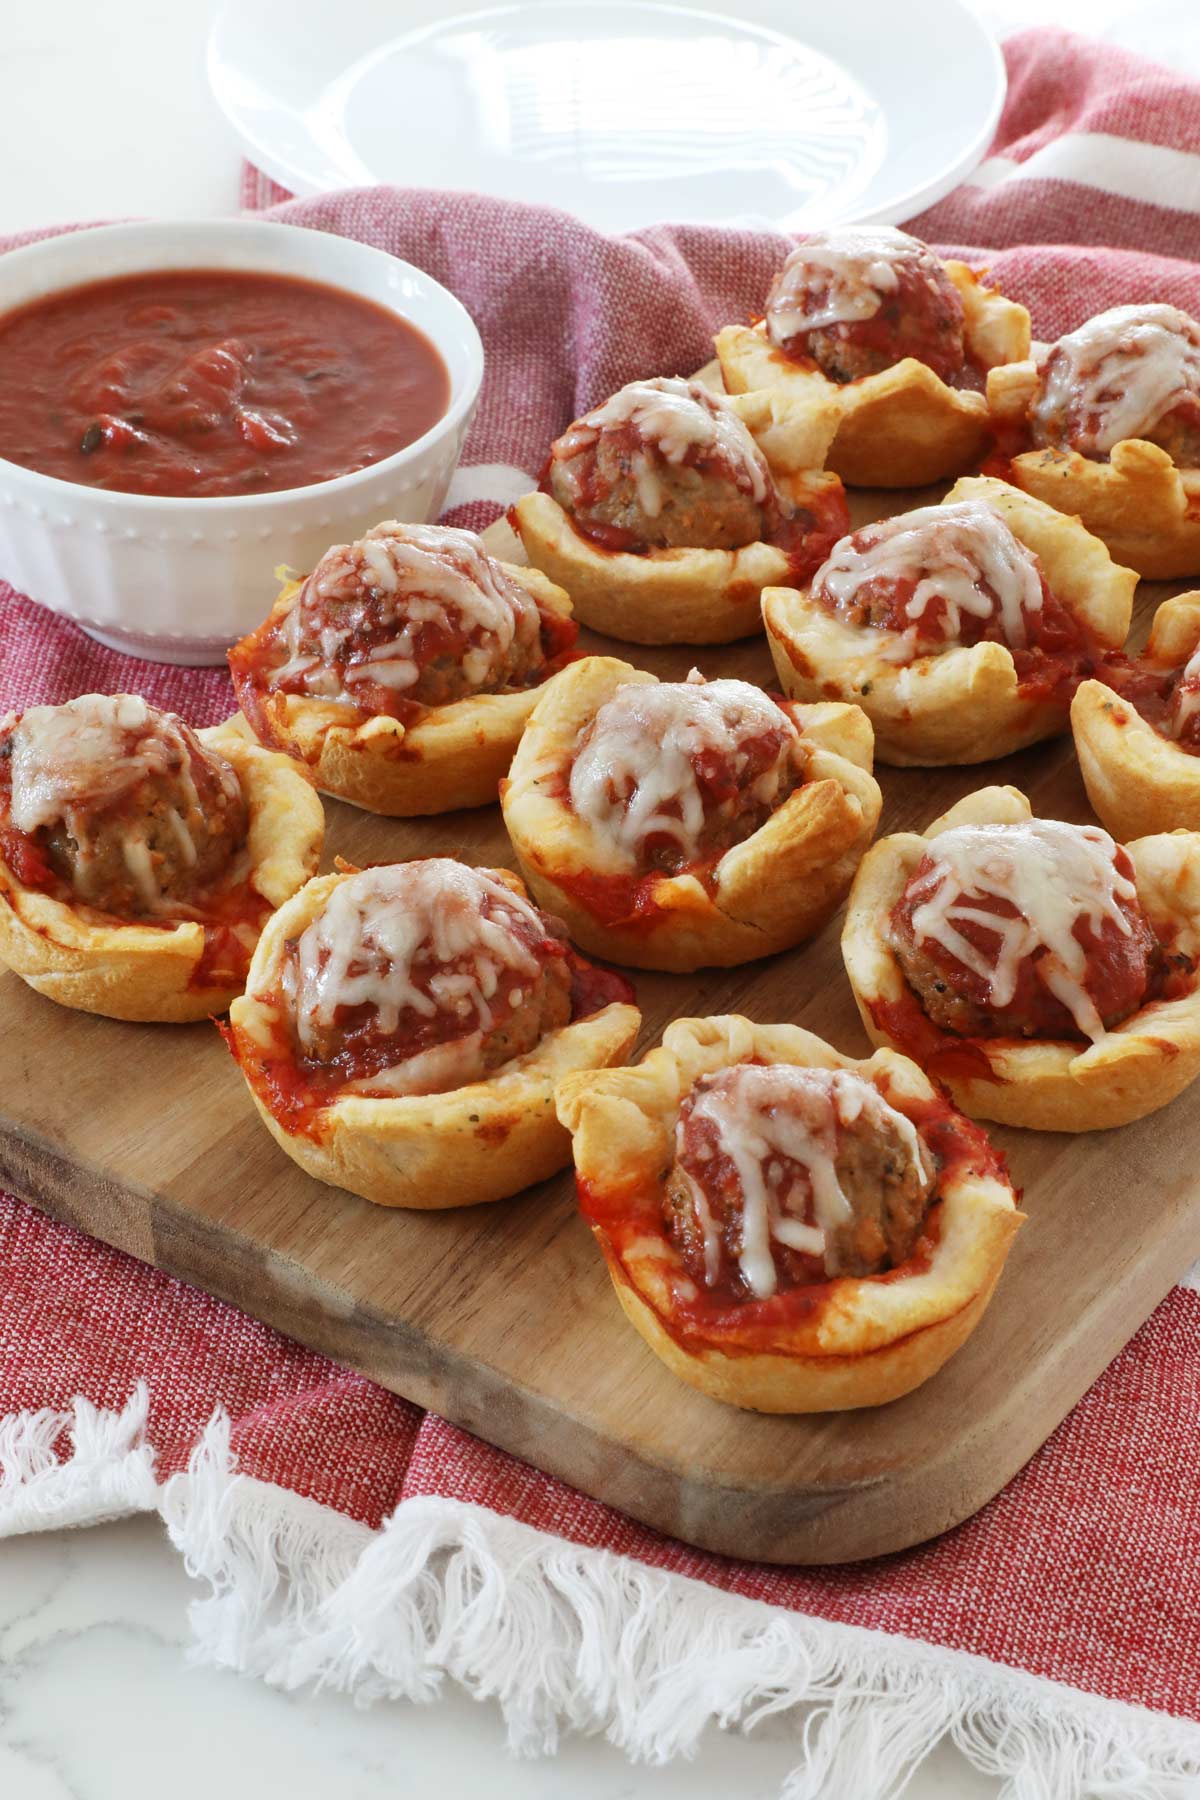 Meatball sub cups sit lined up neatly on a wooden board, on top of a red kitchen towel along with a bowl of marinara sauce for dipping and an empty white plate.